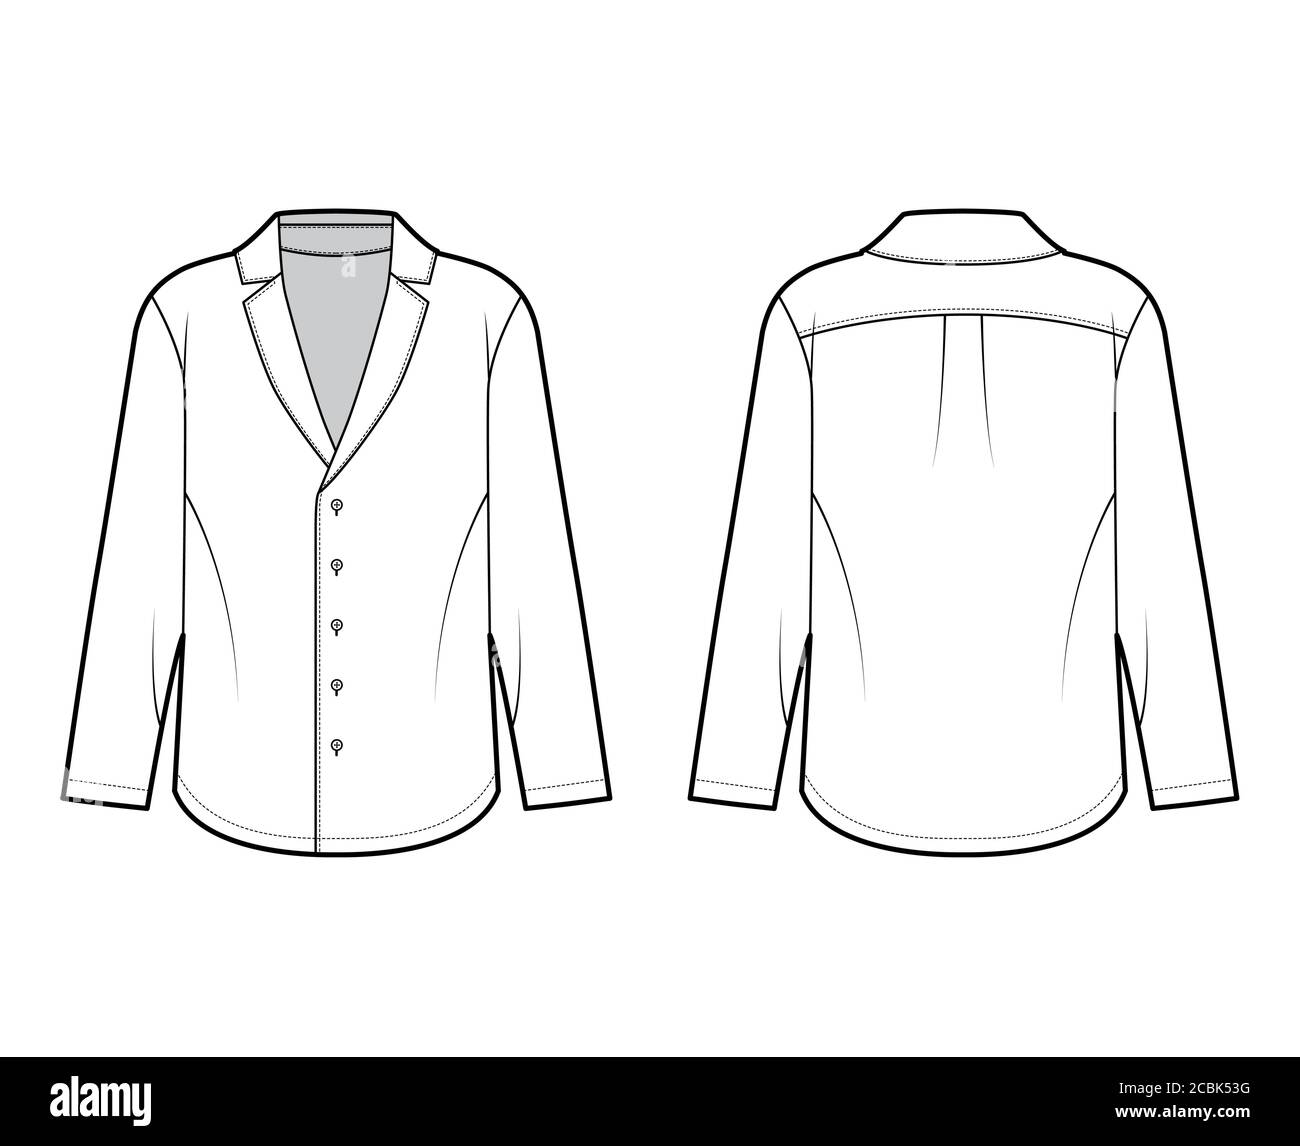 Pajama-style shirt technical fashion illustration with loose silhouette, pointed notch collar, front button fastenings, long sleeves. Flat apparel template front back white color. Women men unisex top Stock Vector